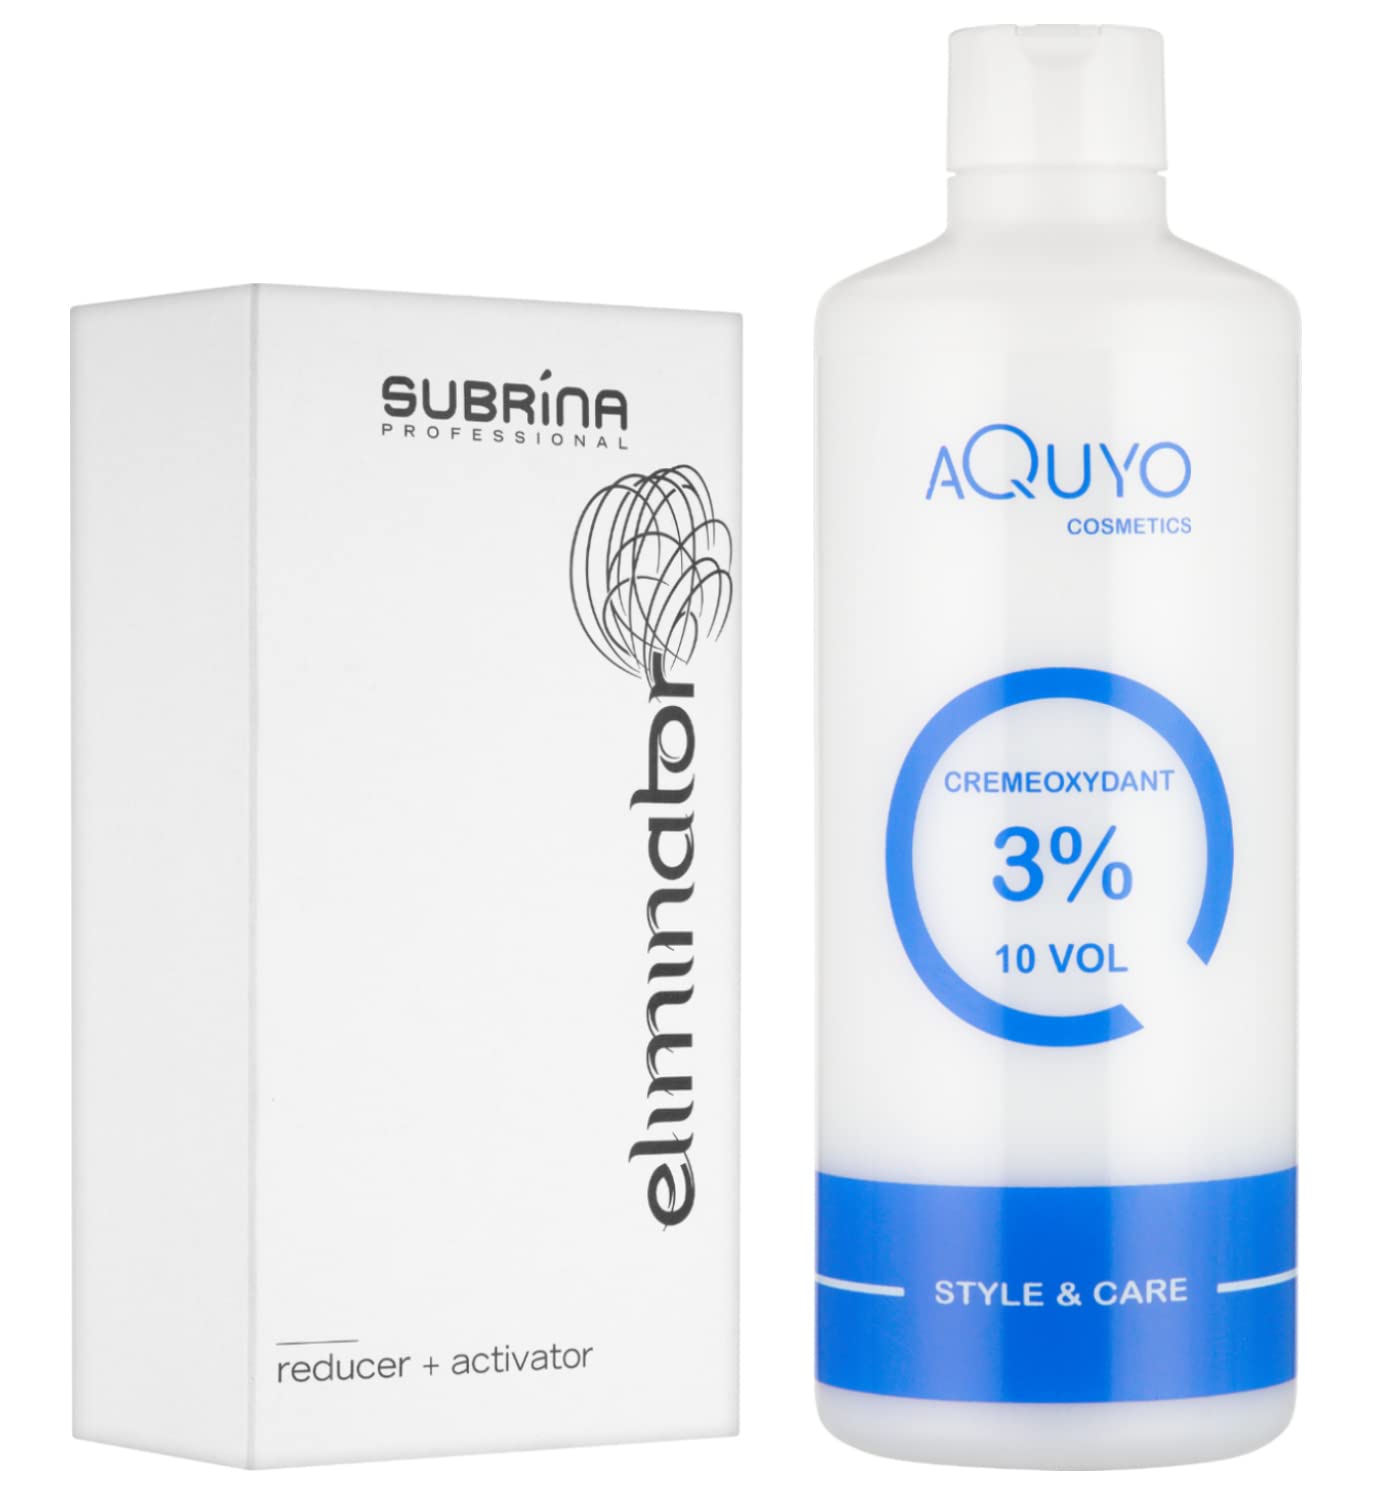 AQUYO Eliminator Hair Colour Remover + Cream Oxydant Developer 3% 500ml | Colour Remover for Removal of Artificial Colour Pigments from Coloured Hair | Colour Remover without Parabens, Paraffins and Bleach